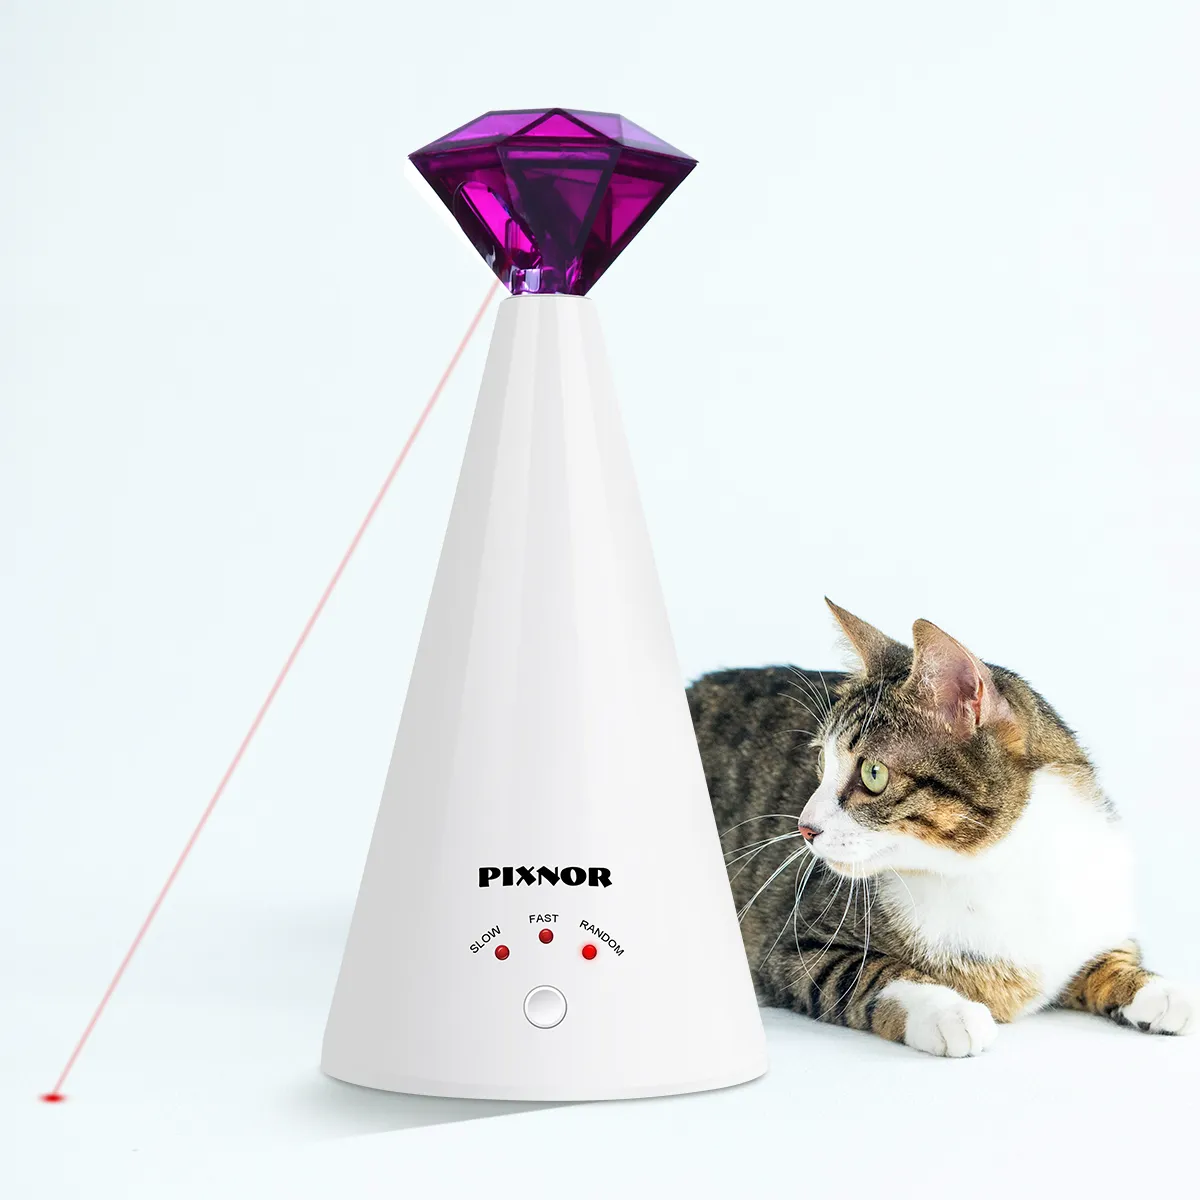 Pixnor Smart Laser Tafice Device Electric Toy Home Interactive Cat Réglable 3 Vitests Pointer Pointer Purple 2011125437421